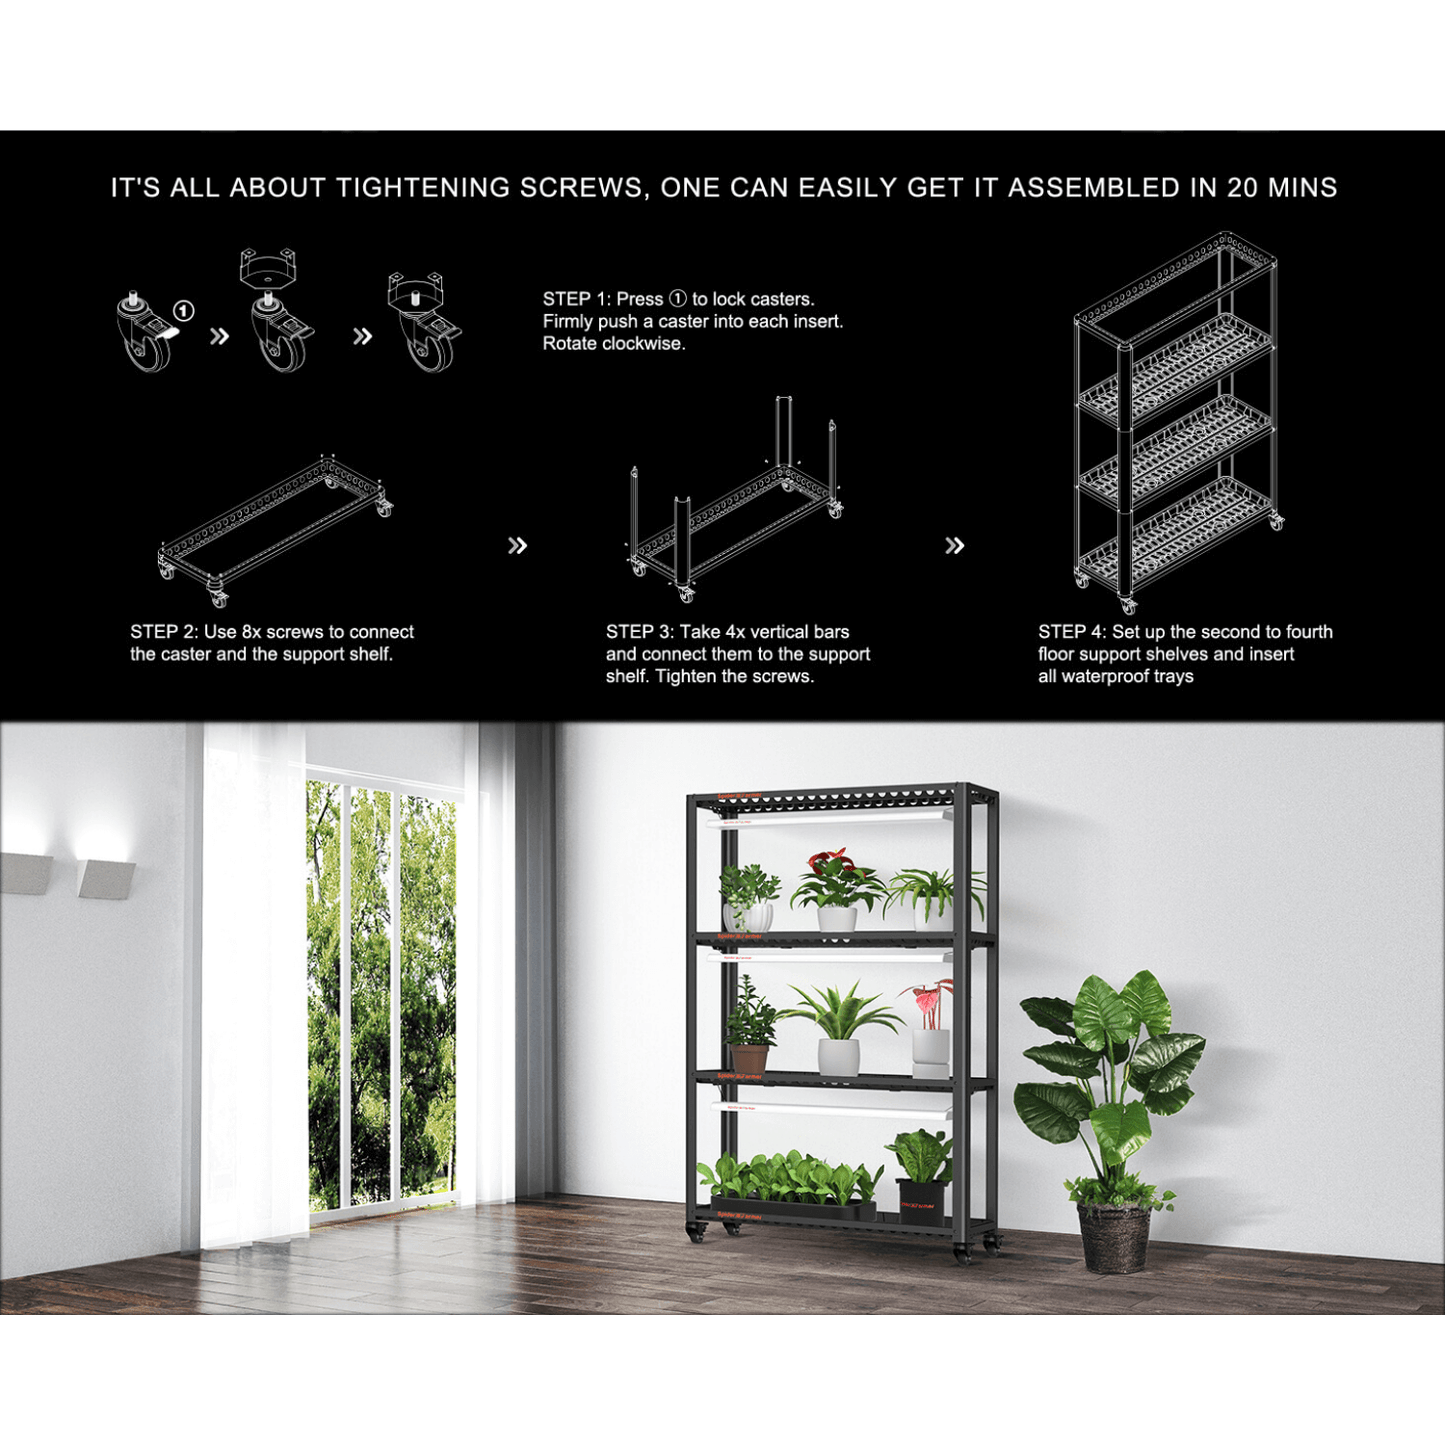 Spider Farmer 3 Tier Metal Plant Stand with Trays SPIDER-SF-Shelfkit-C Accessories 6973280378210